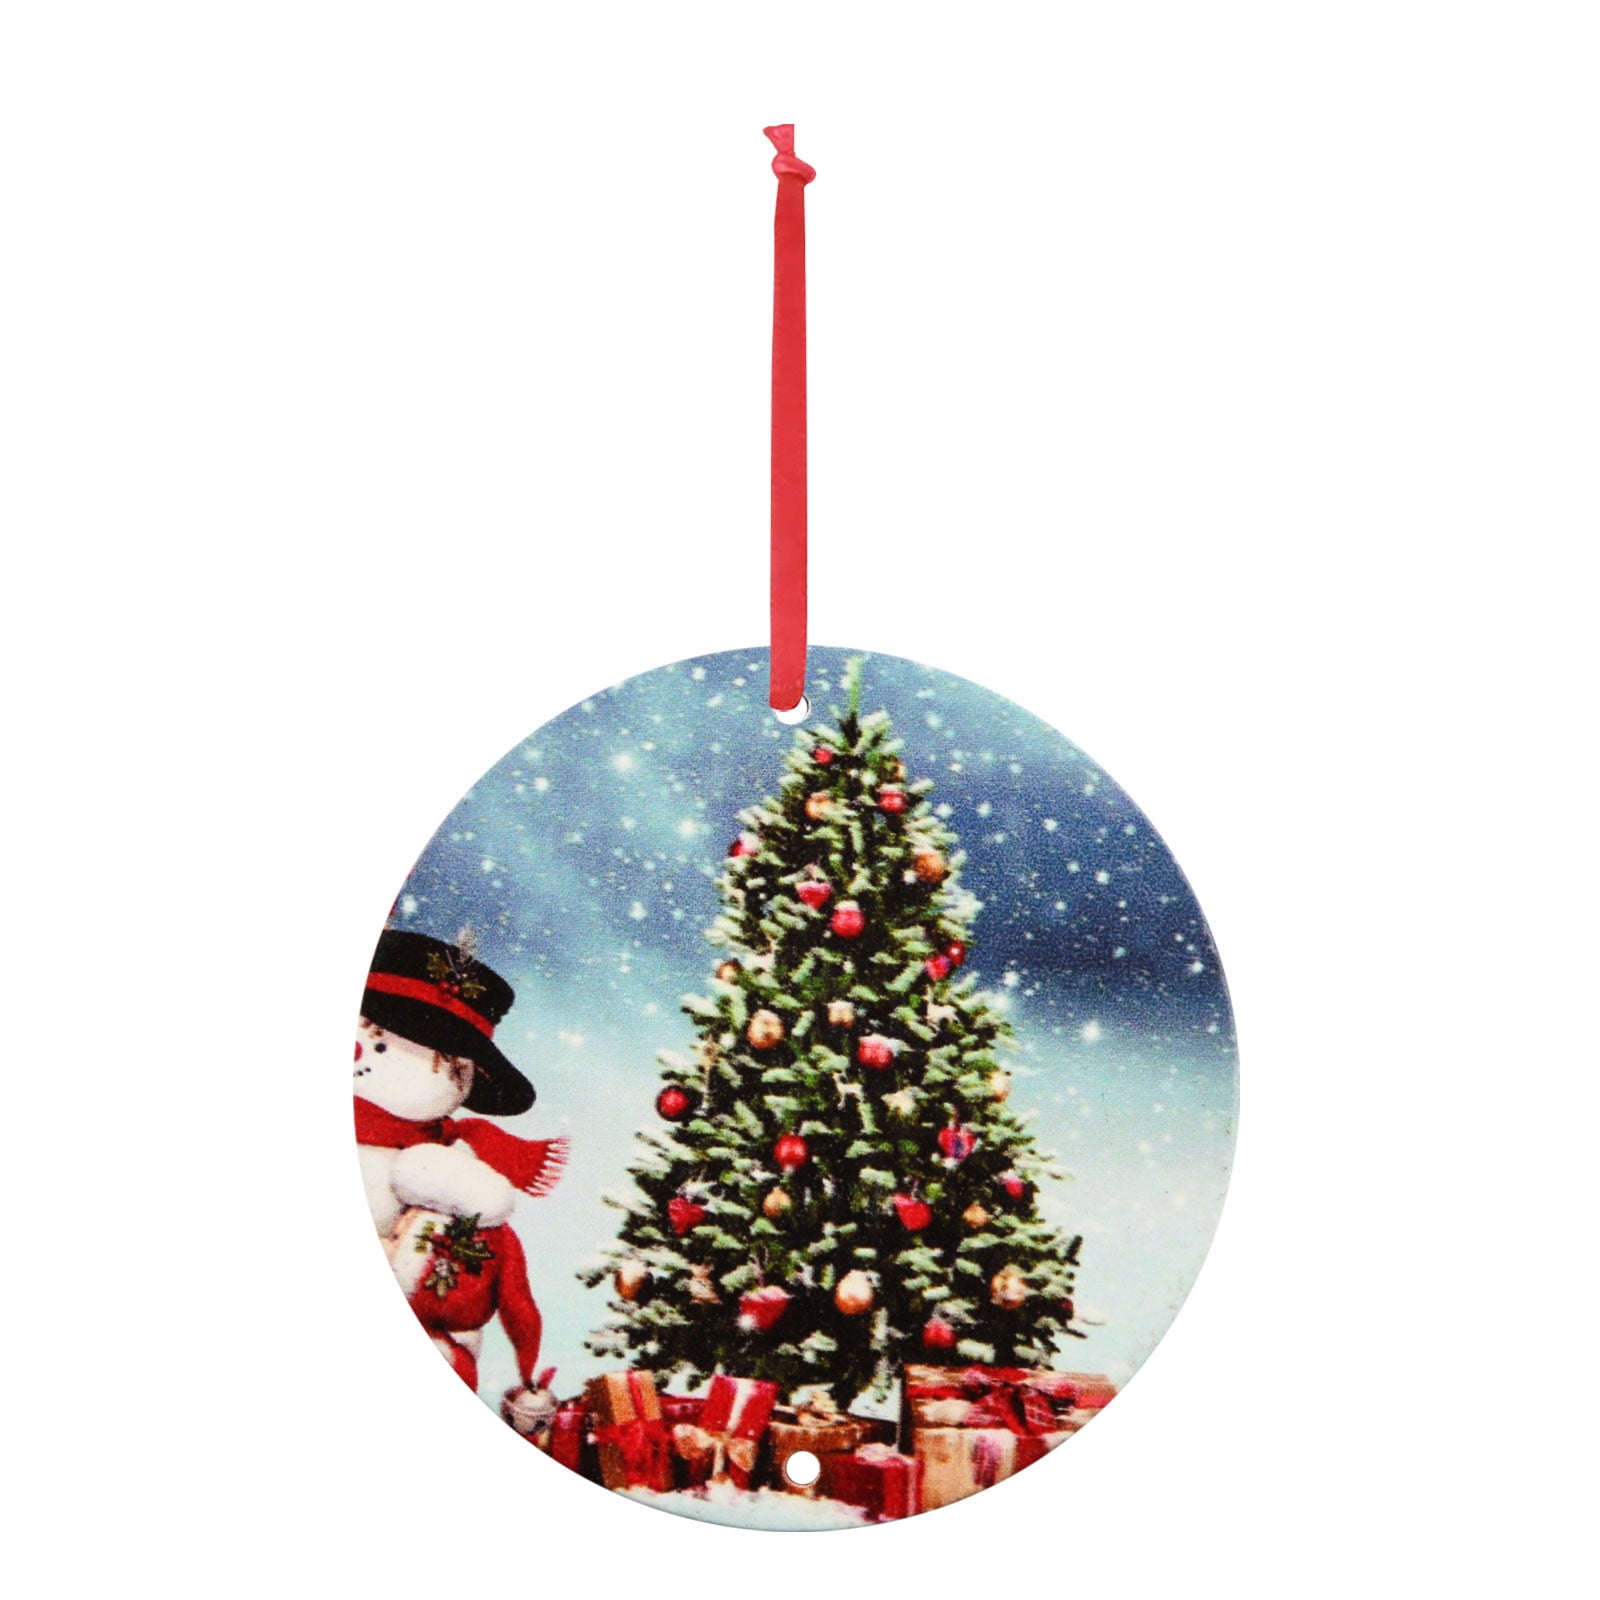 Chiccall Christmas Decorations Clearance,High Quality Christmas ...